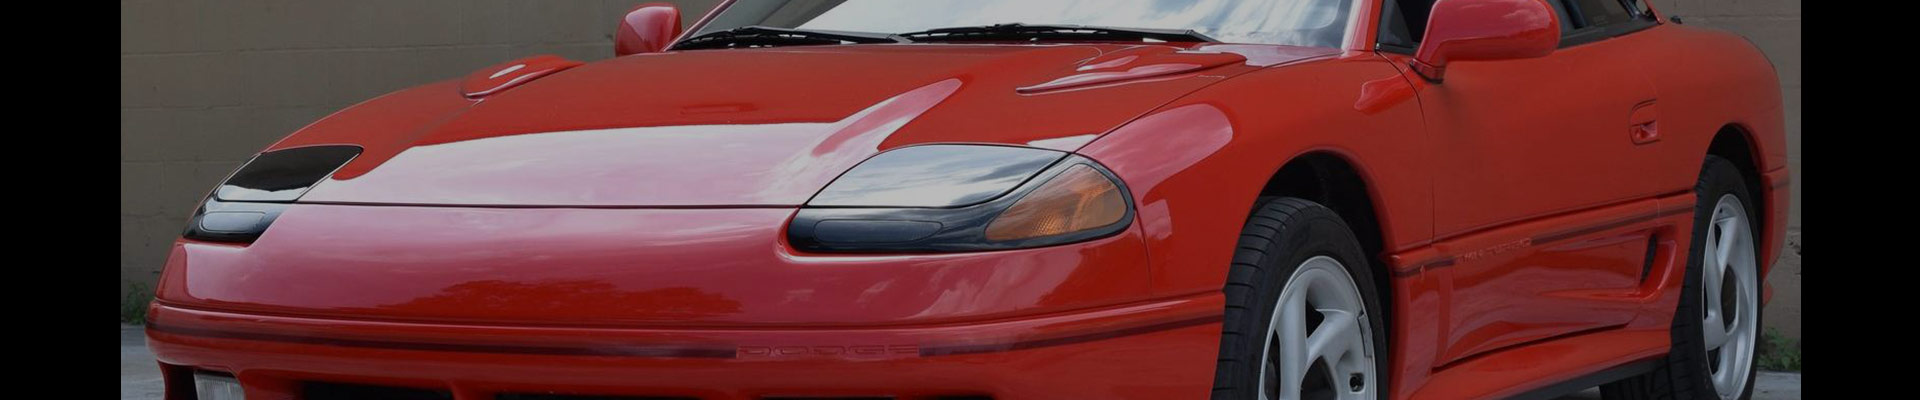 Shop Replacement and OEM 1996 Dodge Stealth Parts with Discounted Price on the Net